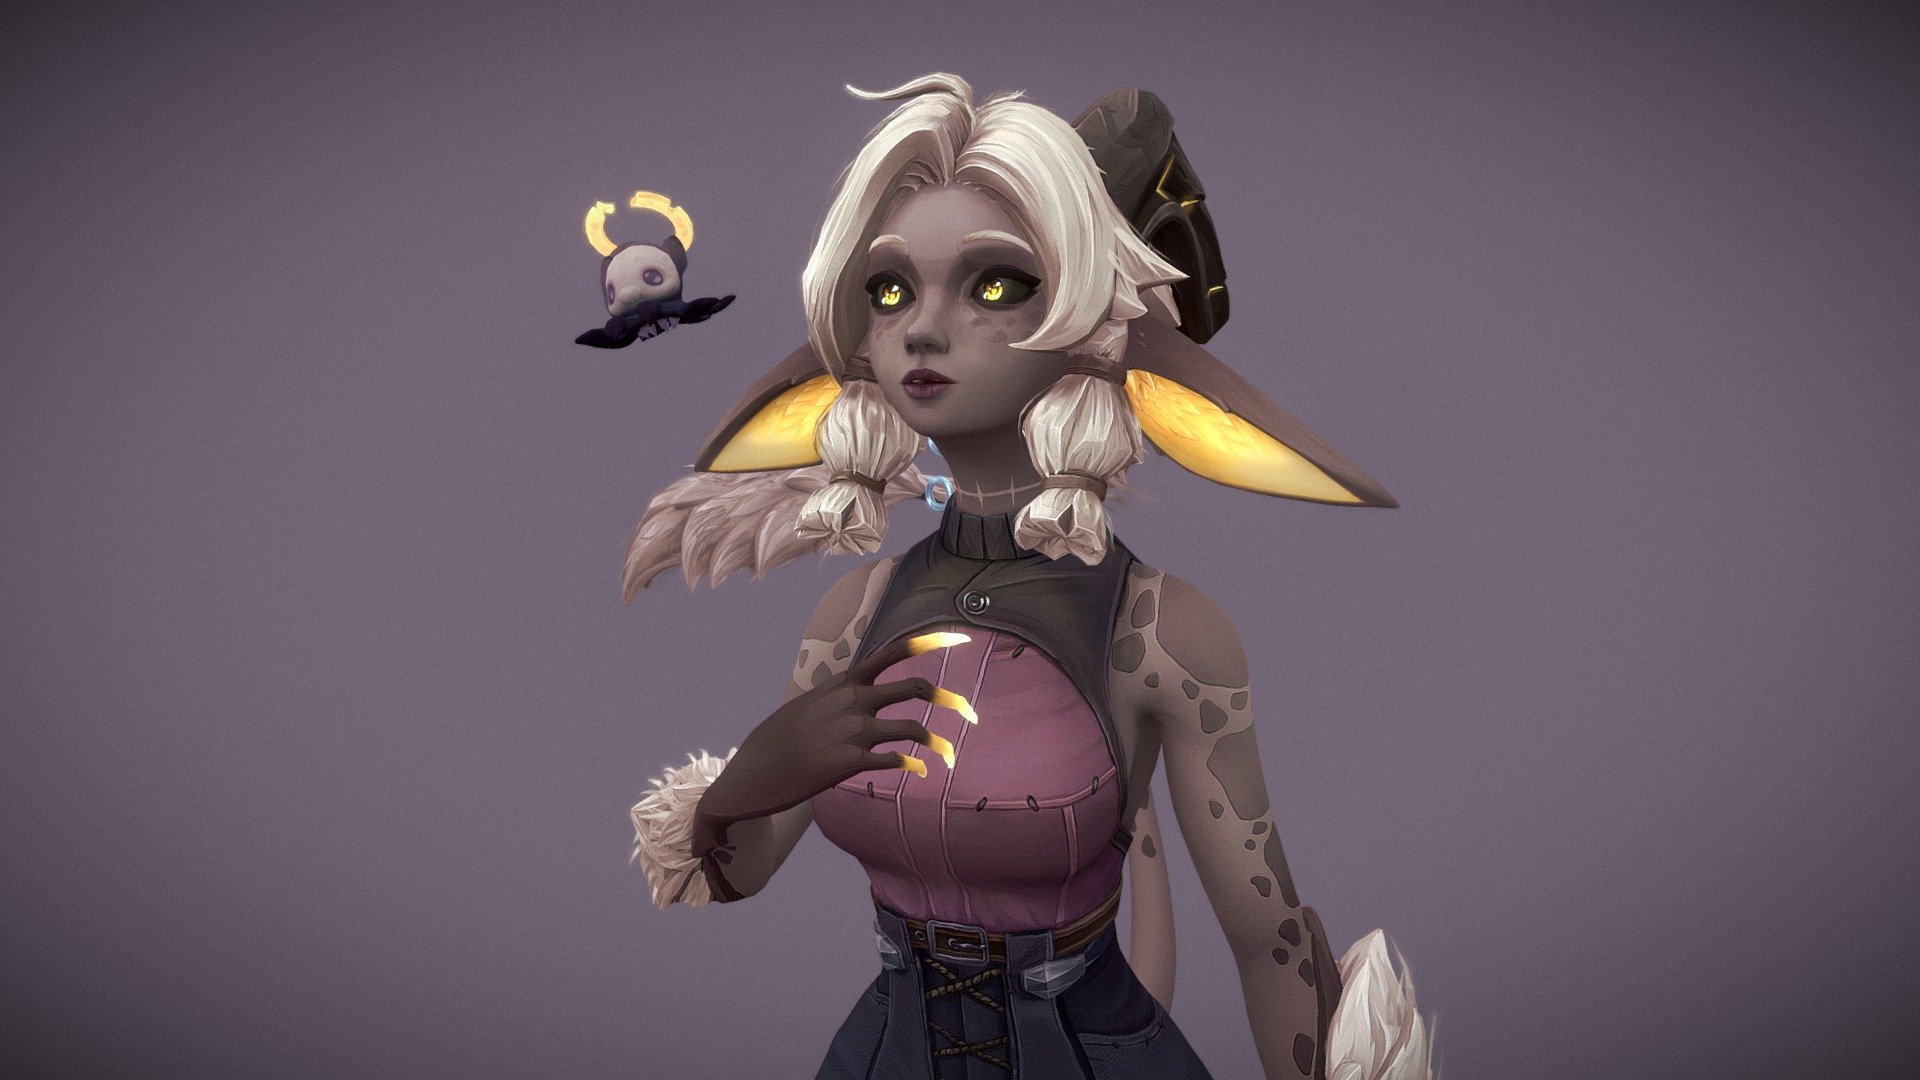 An updated version of one of my original characters. 
Six months old version: https://sketchfab.com/3d-models/needle-oc-2d523b639c79407daff09ed23491e706
Model created: CataRackta ArtStation: https://www.artstation.com/catarackta twitter: twitter.com/CataRackta deviantart: deviantart.com/catarackta pixiv: pixiv.net/en/users/65276336 


Used software: Zbrush, Photoshop, 3D Coat, Substance painter, Cinema4D, Autodesk Maya, Marmoset Toolbag.



A few frames of the animation, which you can see here: https://youtu.be/aWe1Dm9_SyQ  or https://coub.com/view/38ivi9


Thanks for your support!




 - Chimera OC - 3D model by CataRackta 3d model